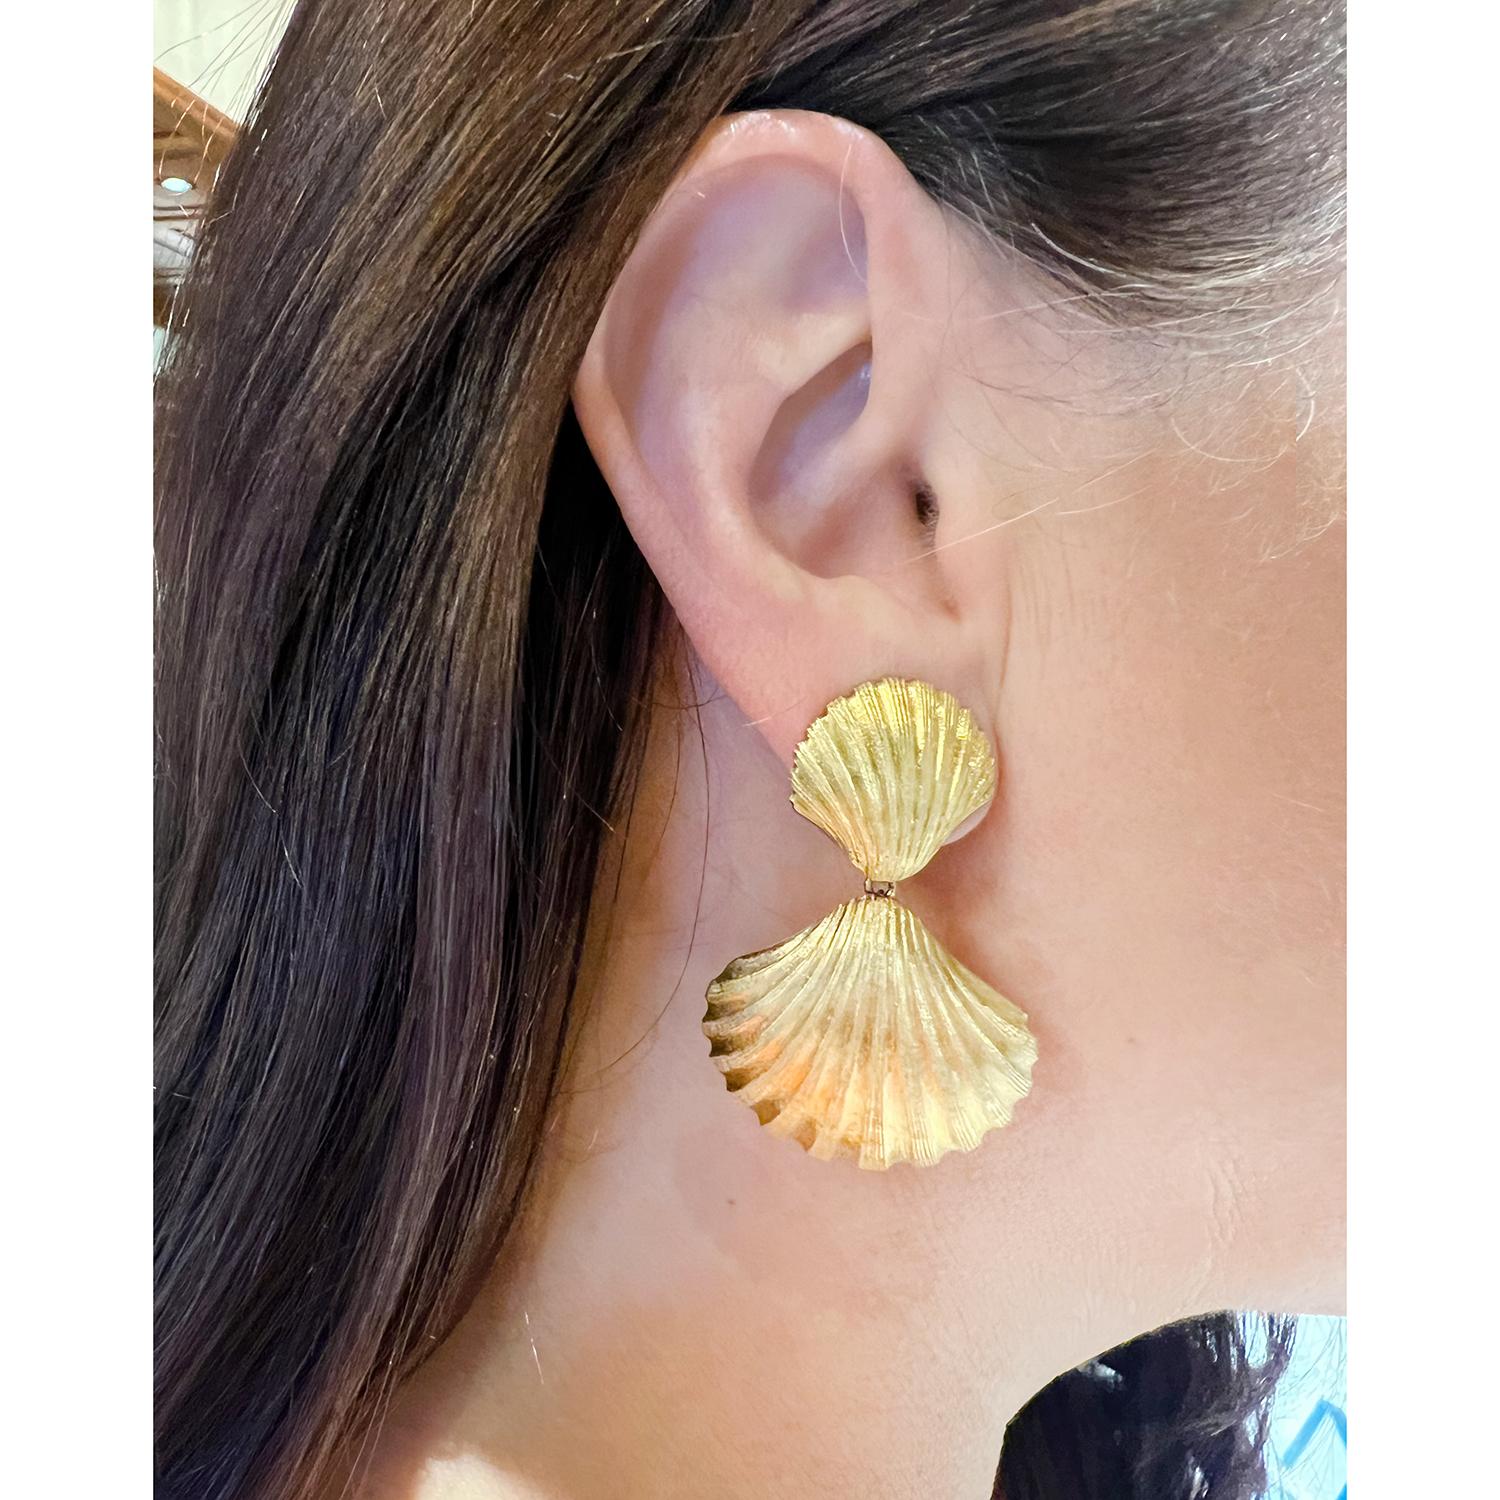 Unique shell door knocker design earrings by Mario Buccellati.  This classic shell motif design is comprised of a smaller shell with larger inverted shell drop bottom.  Hand finished in the Buccellati engraving style with a recessed stripe design on